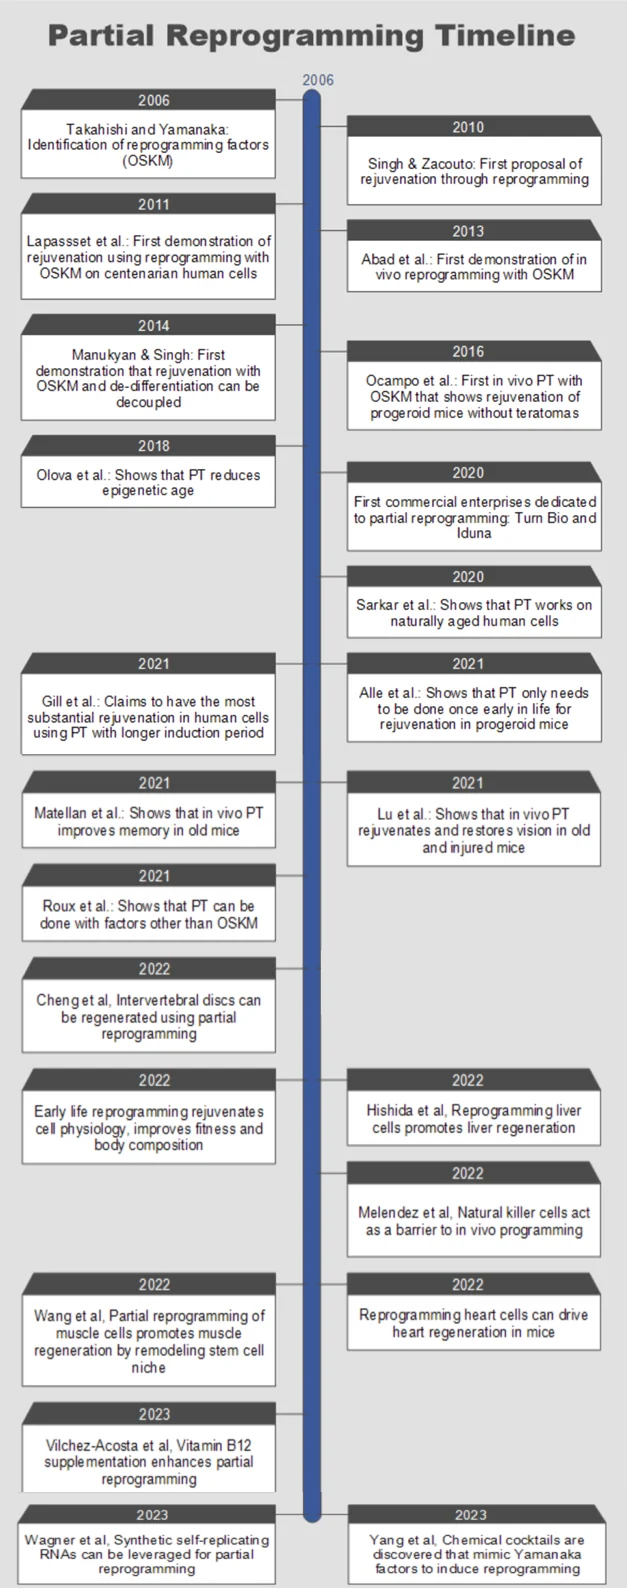 Partial reprogramming timeline